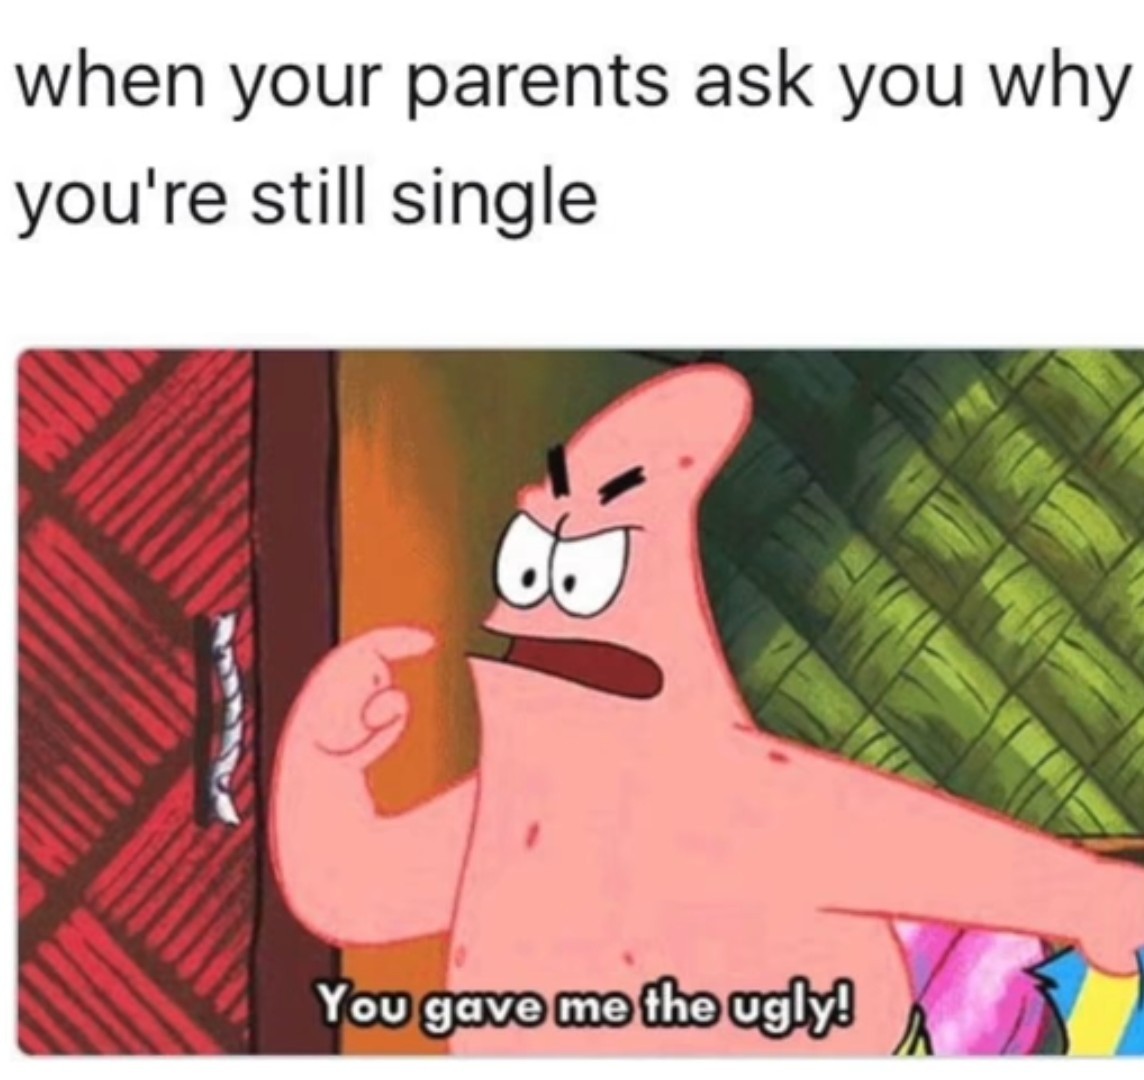 I've never related so much with Patrick - meme